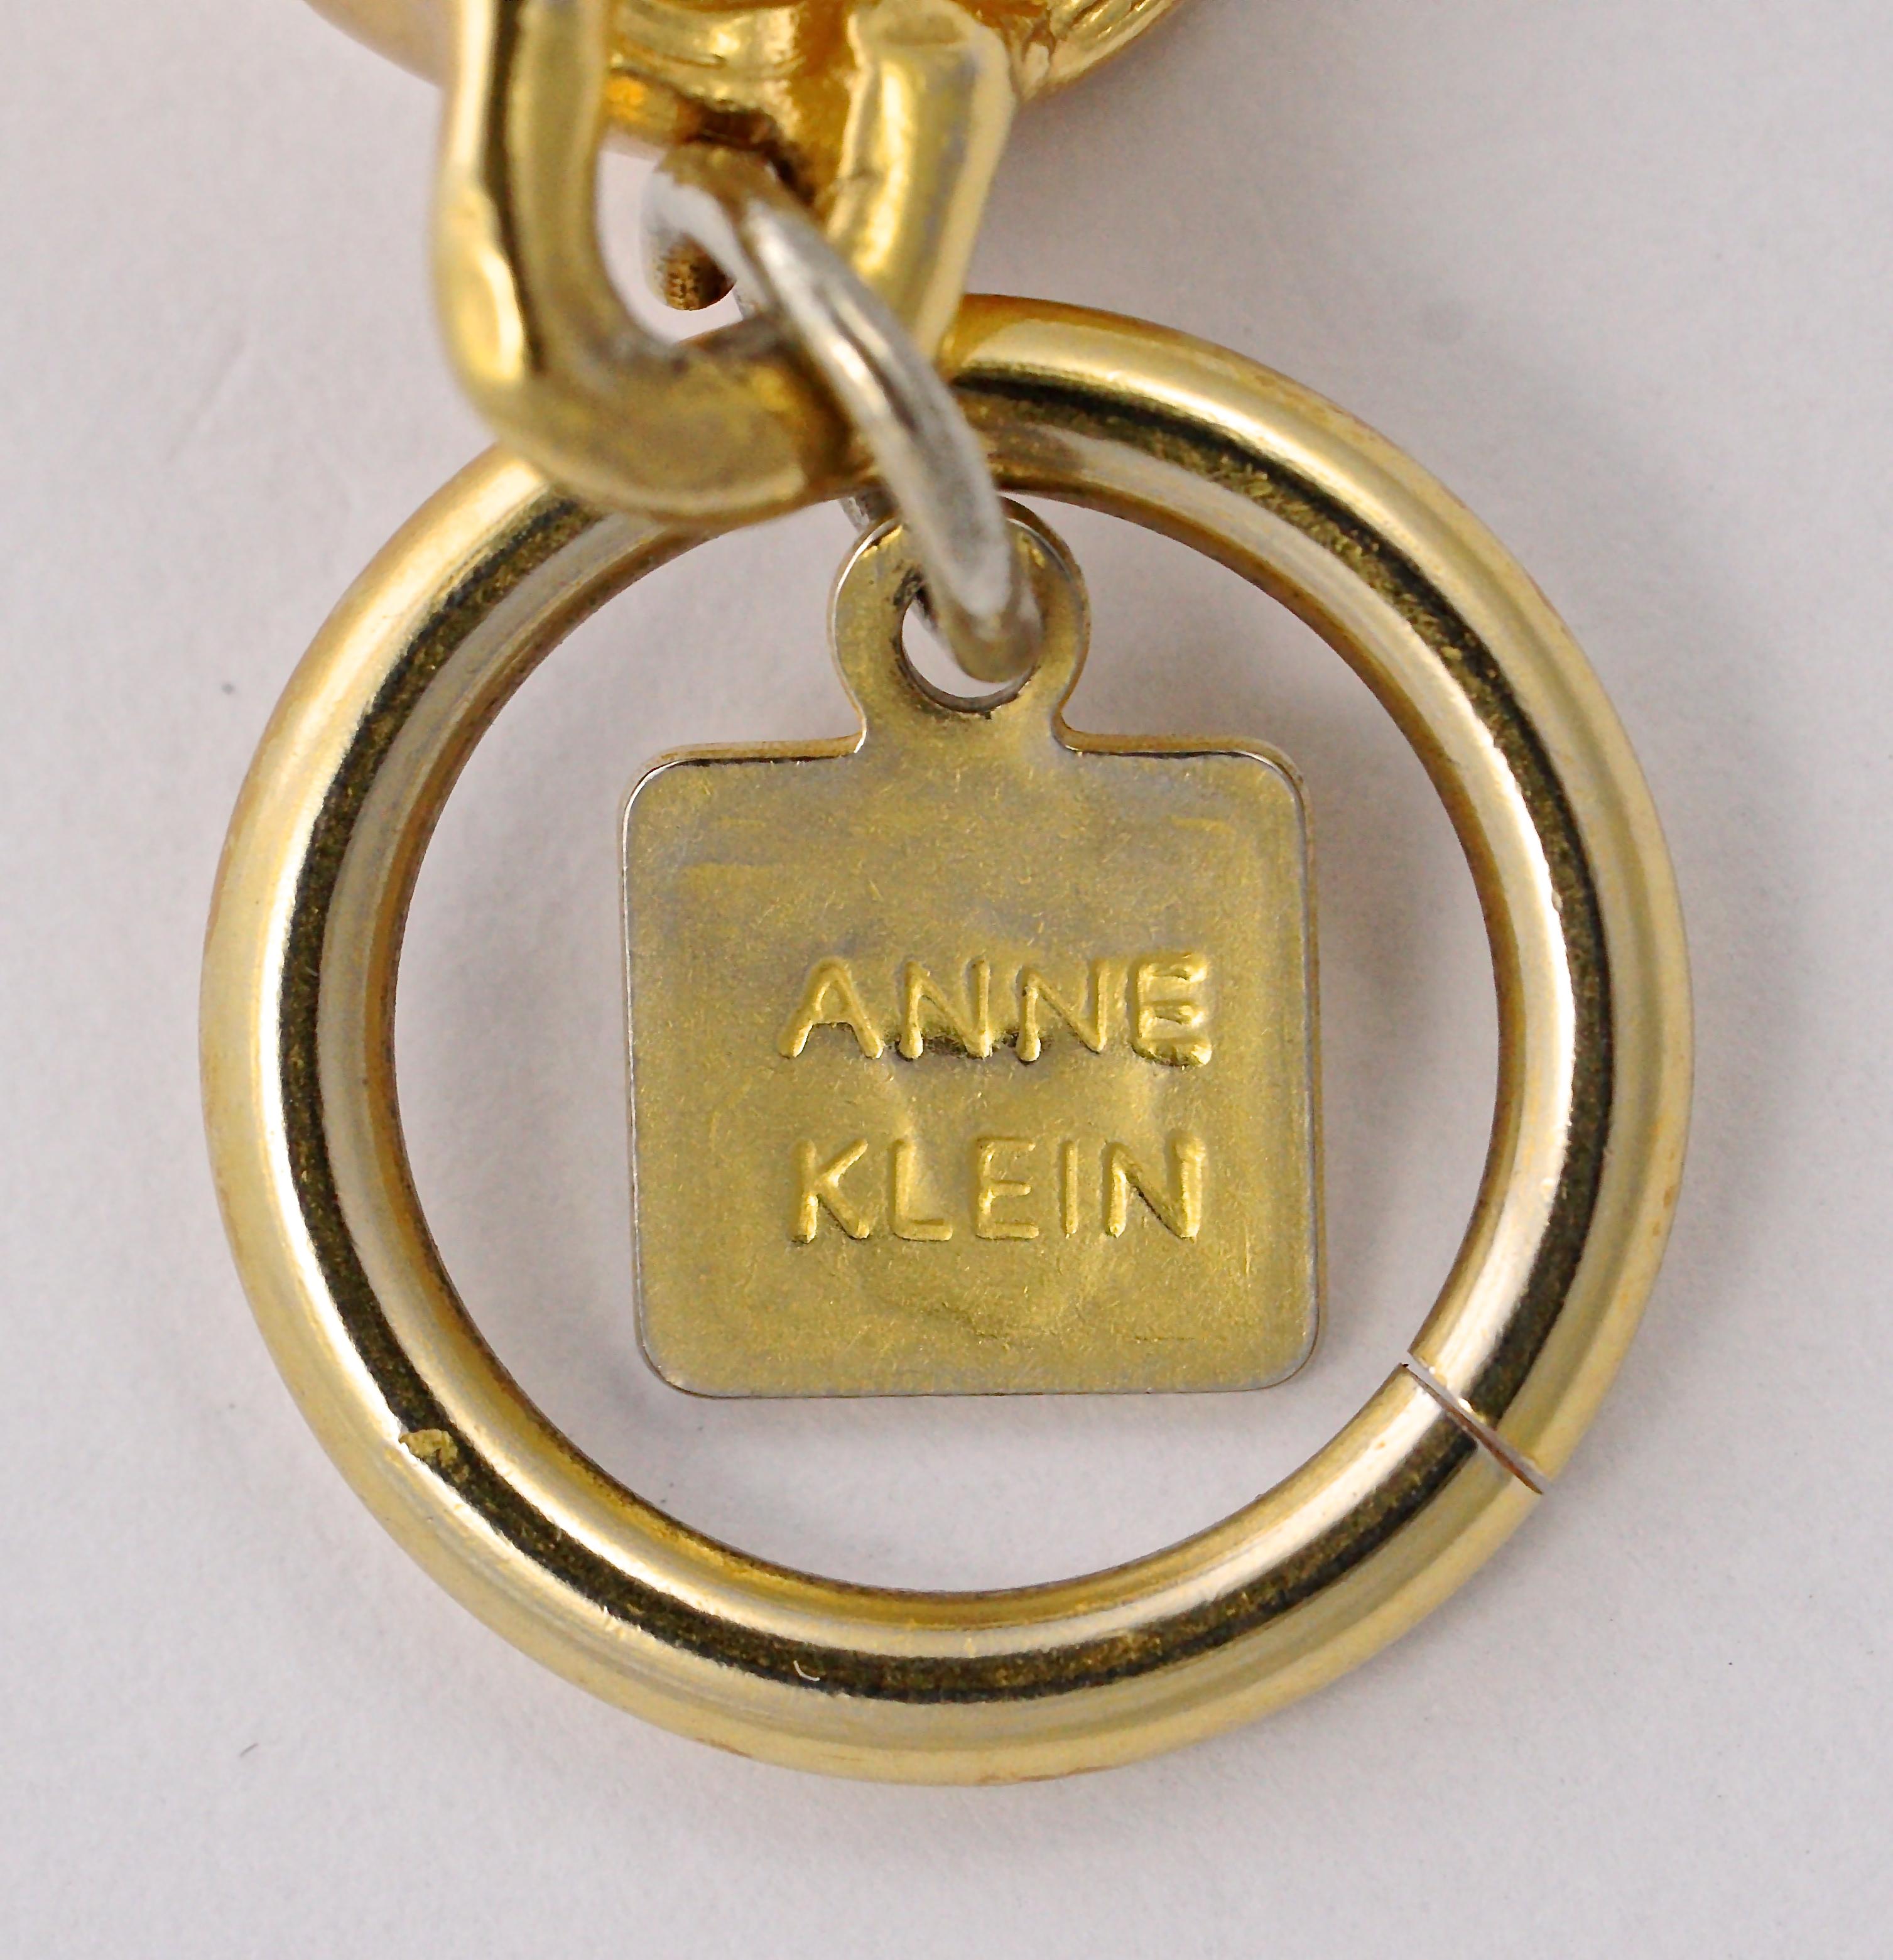 Anne Klein Gold Plated Satin Brushed Link Bracelet with Toggle Clasp circa 1980s 5